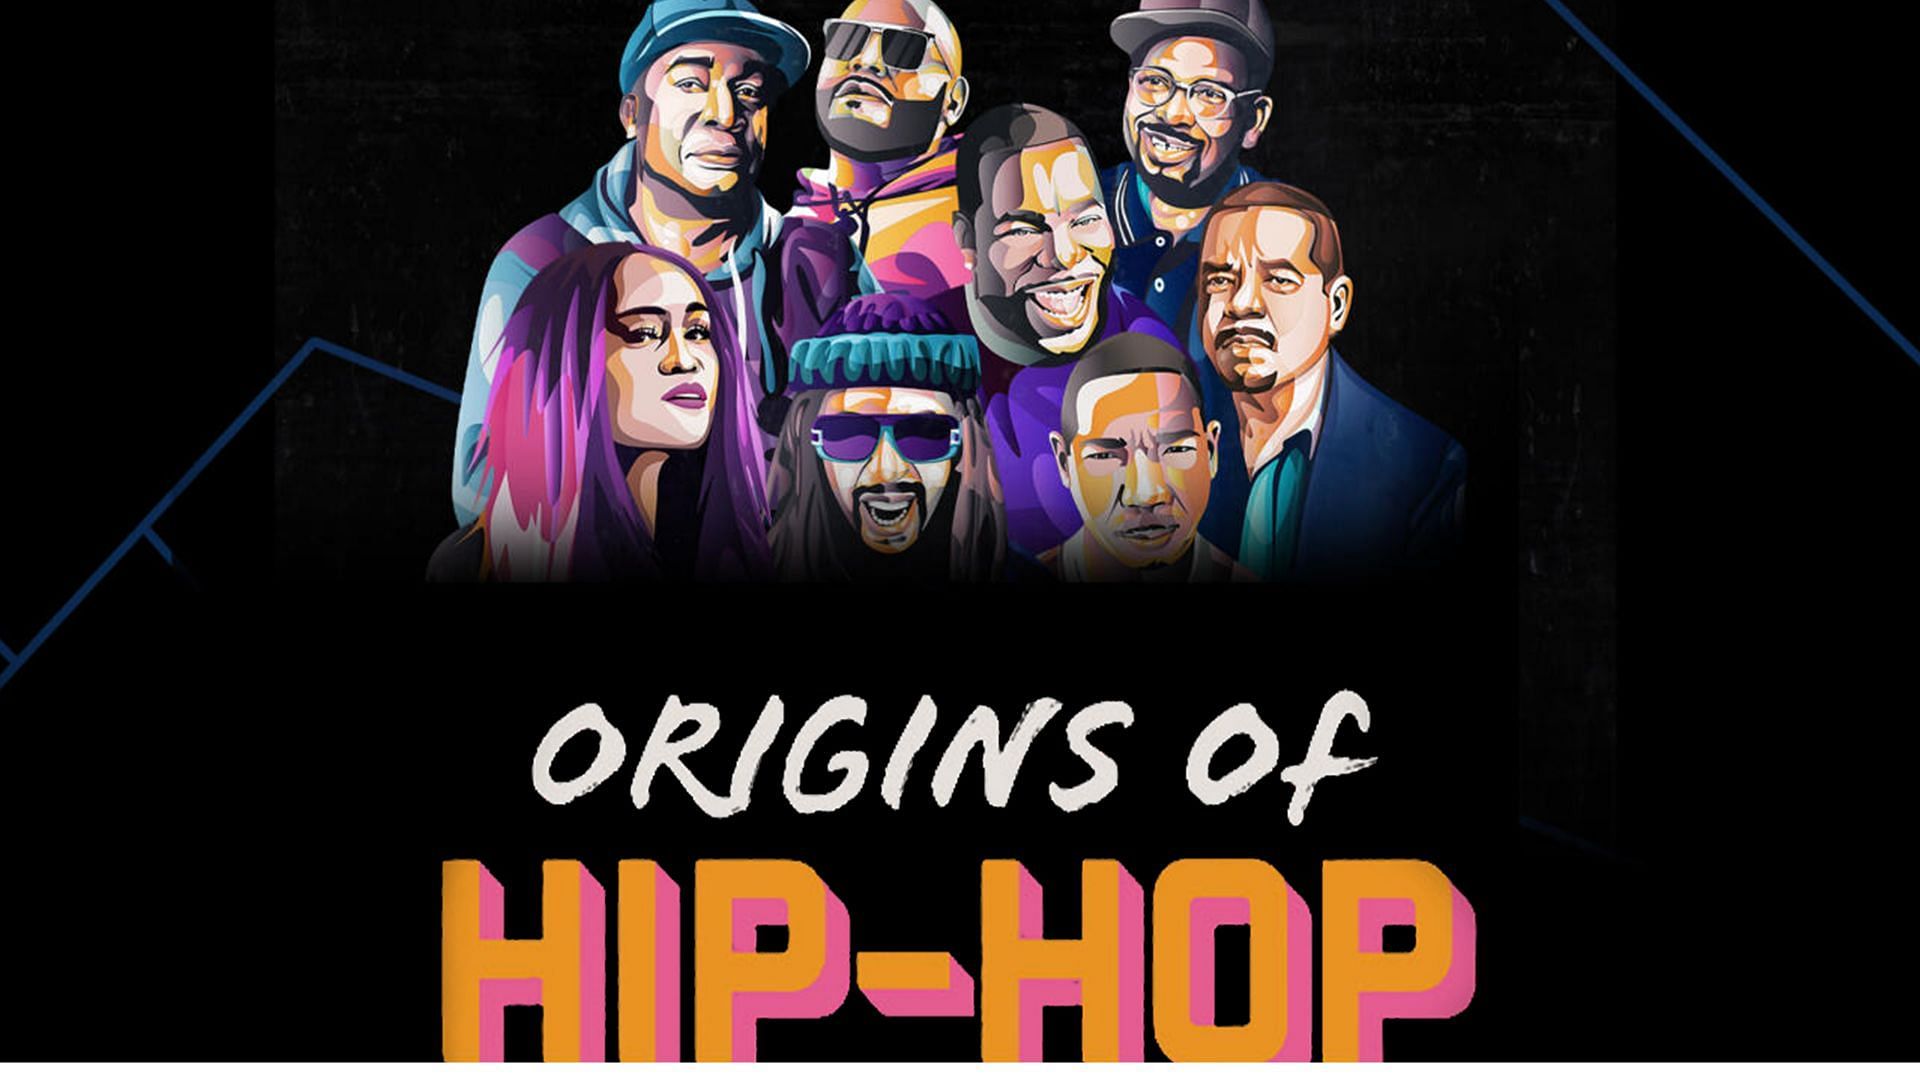 vOrigins of Hip Hop is arriving this May 30, 2022, exclusively on A&amp;E (Image via A&amp;T TV)